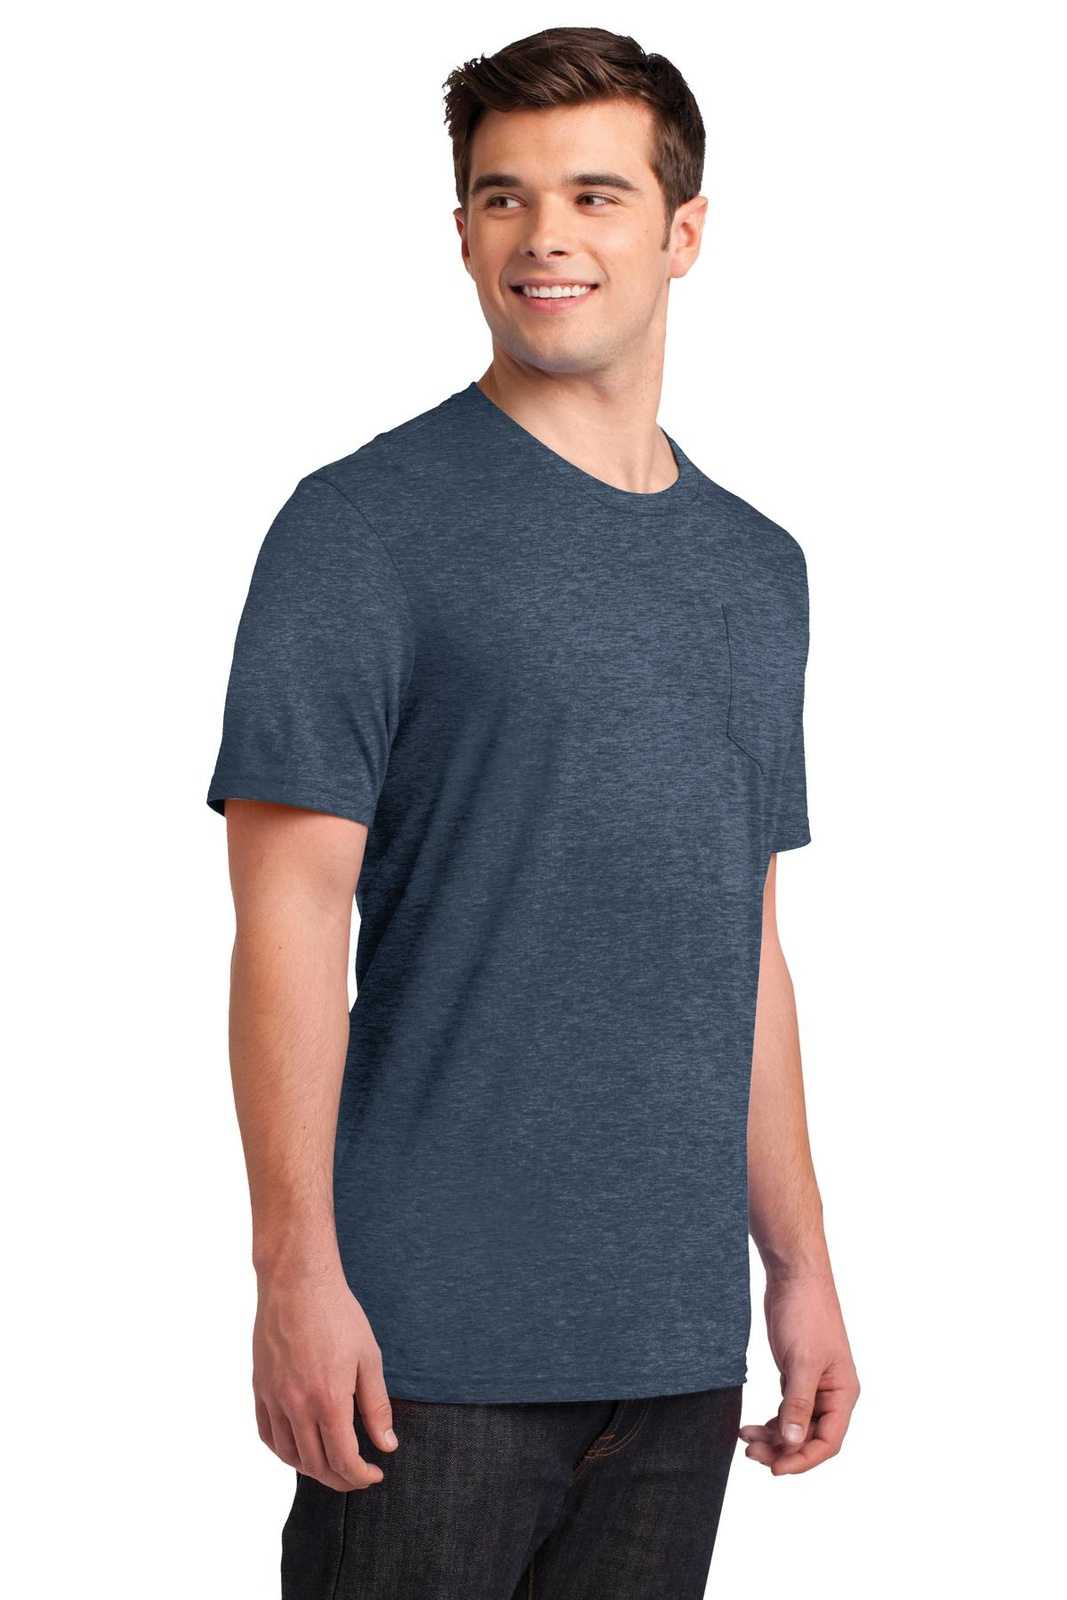 District DT6000P Very Important Tee with Pocket - Heathered Navy - HIT a Double - 4